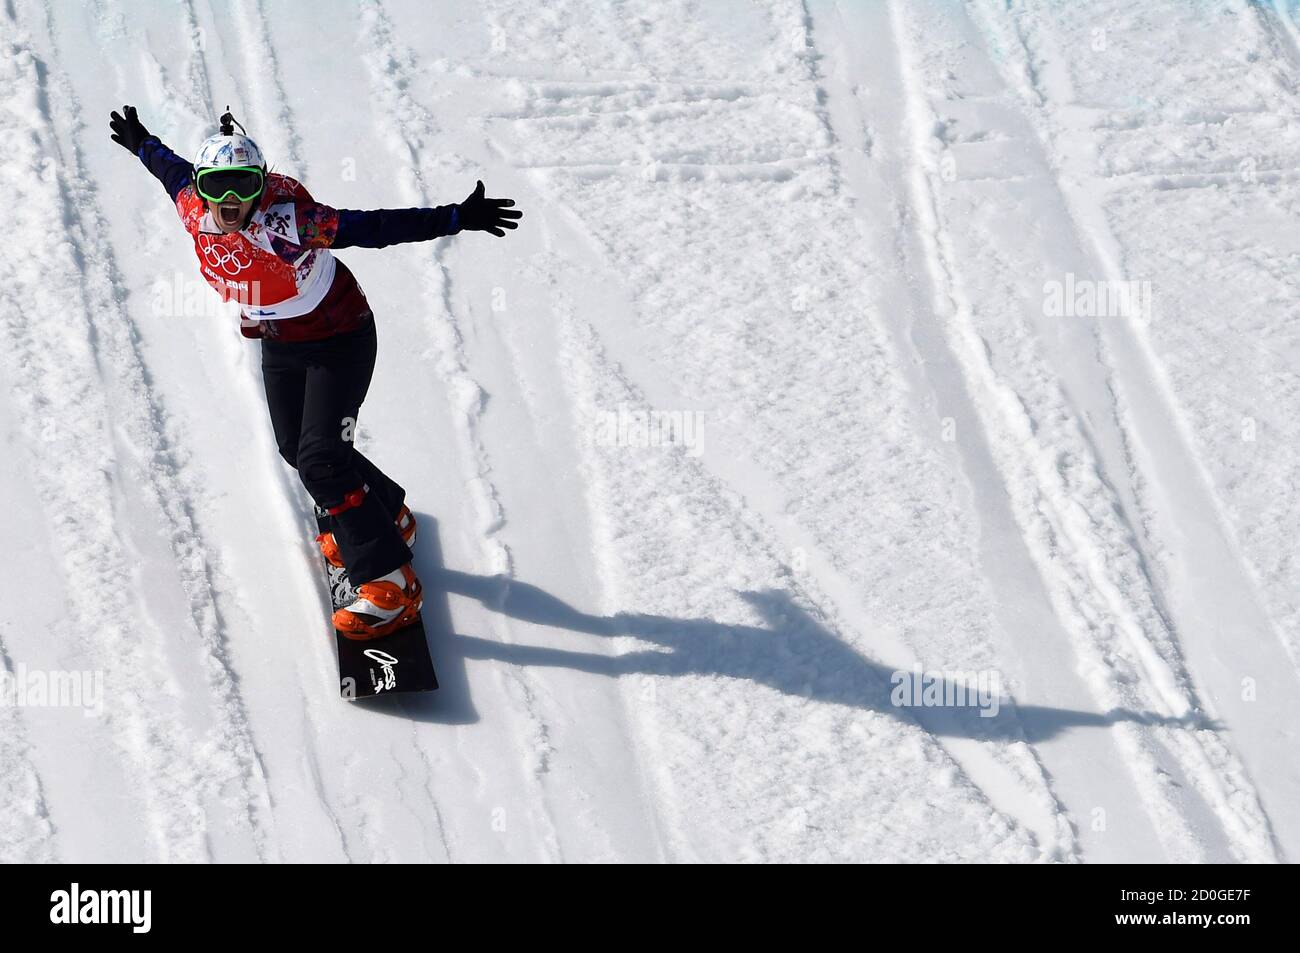 Eva Samkova of the Czech Republic reacts during the women's snowboard cross  competition at the Sochi 2014 Winter Olympics in Rosa Khutor February 16,  2014. Samkova avoided the rough and tumble of